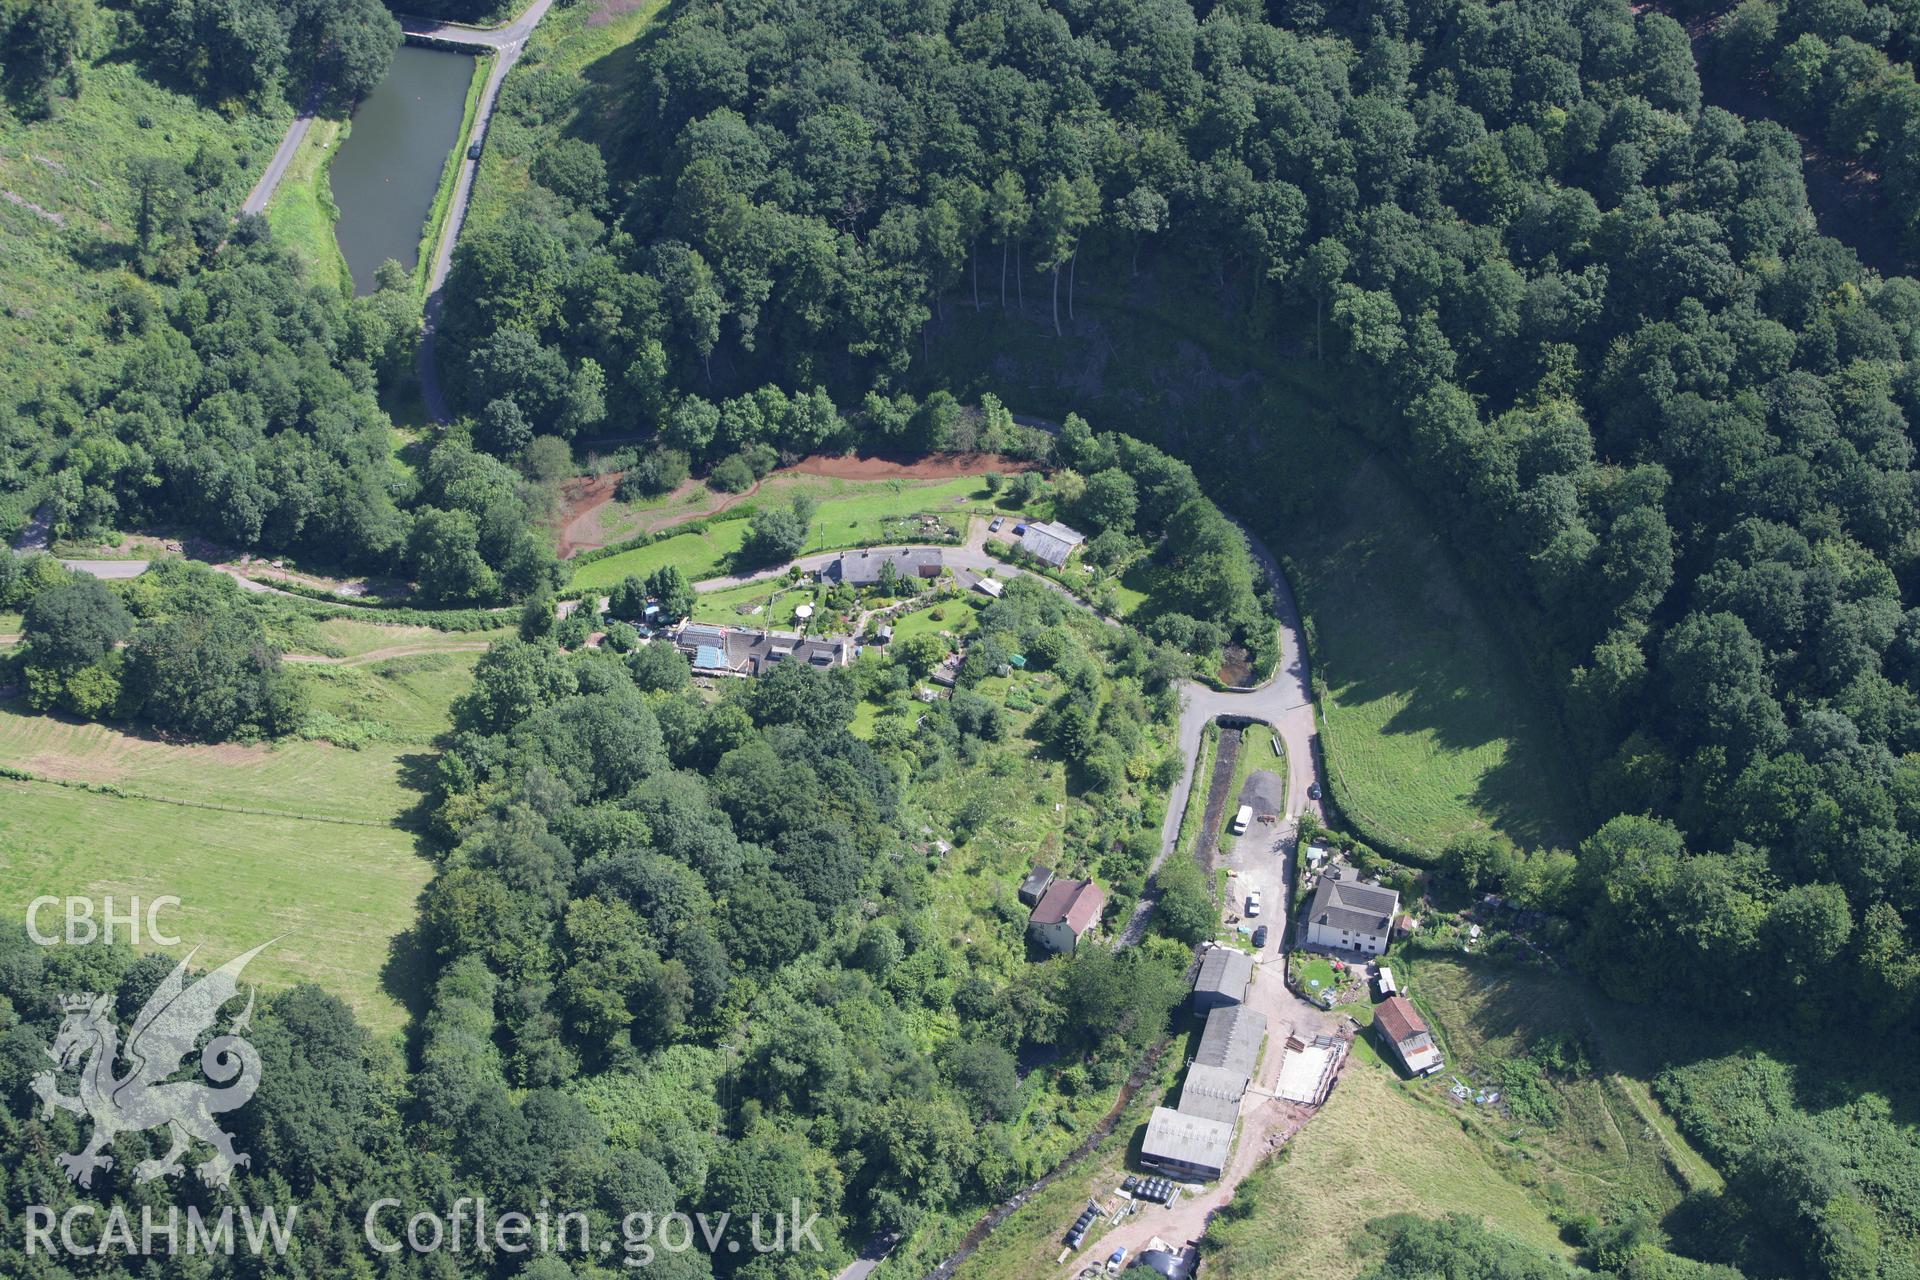 RCAHMW colour oblique photograph of Tintern Upper Wire Works (New Tongs Mill). Taken by Toby Driver on 21/07/2008.